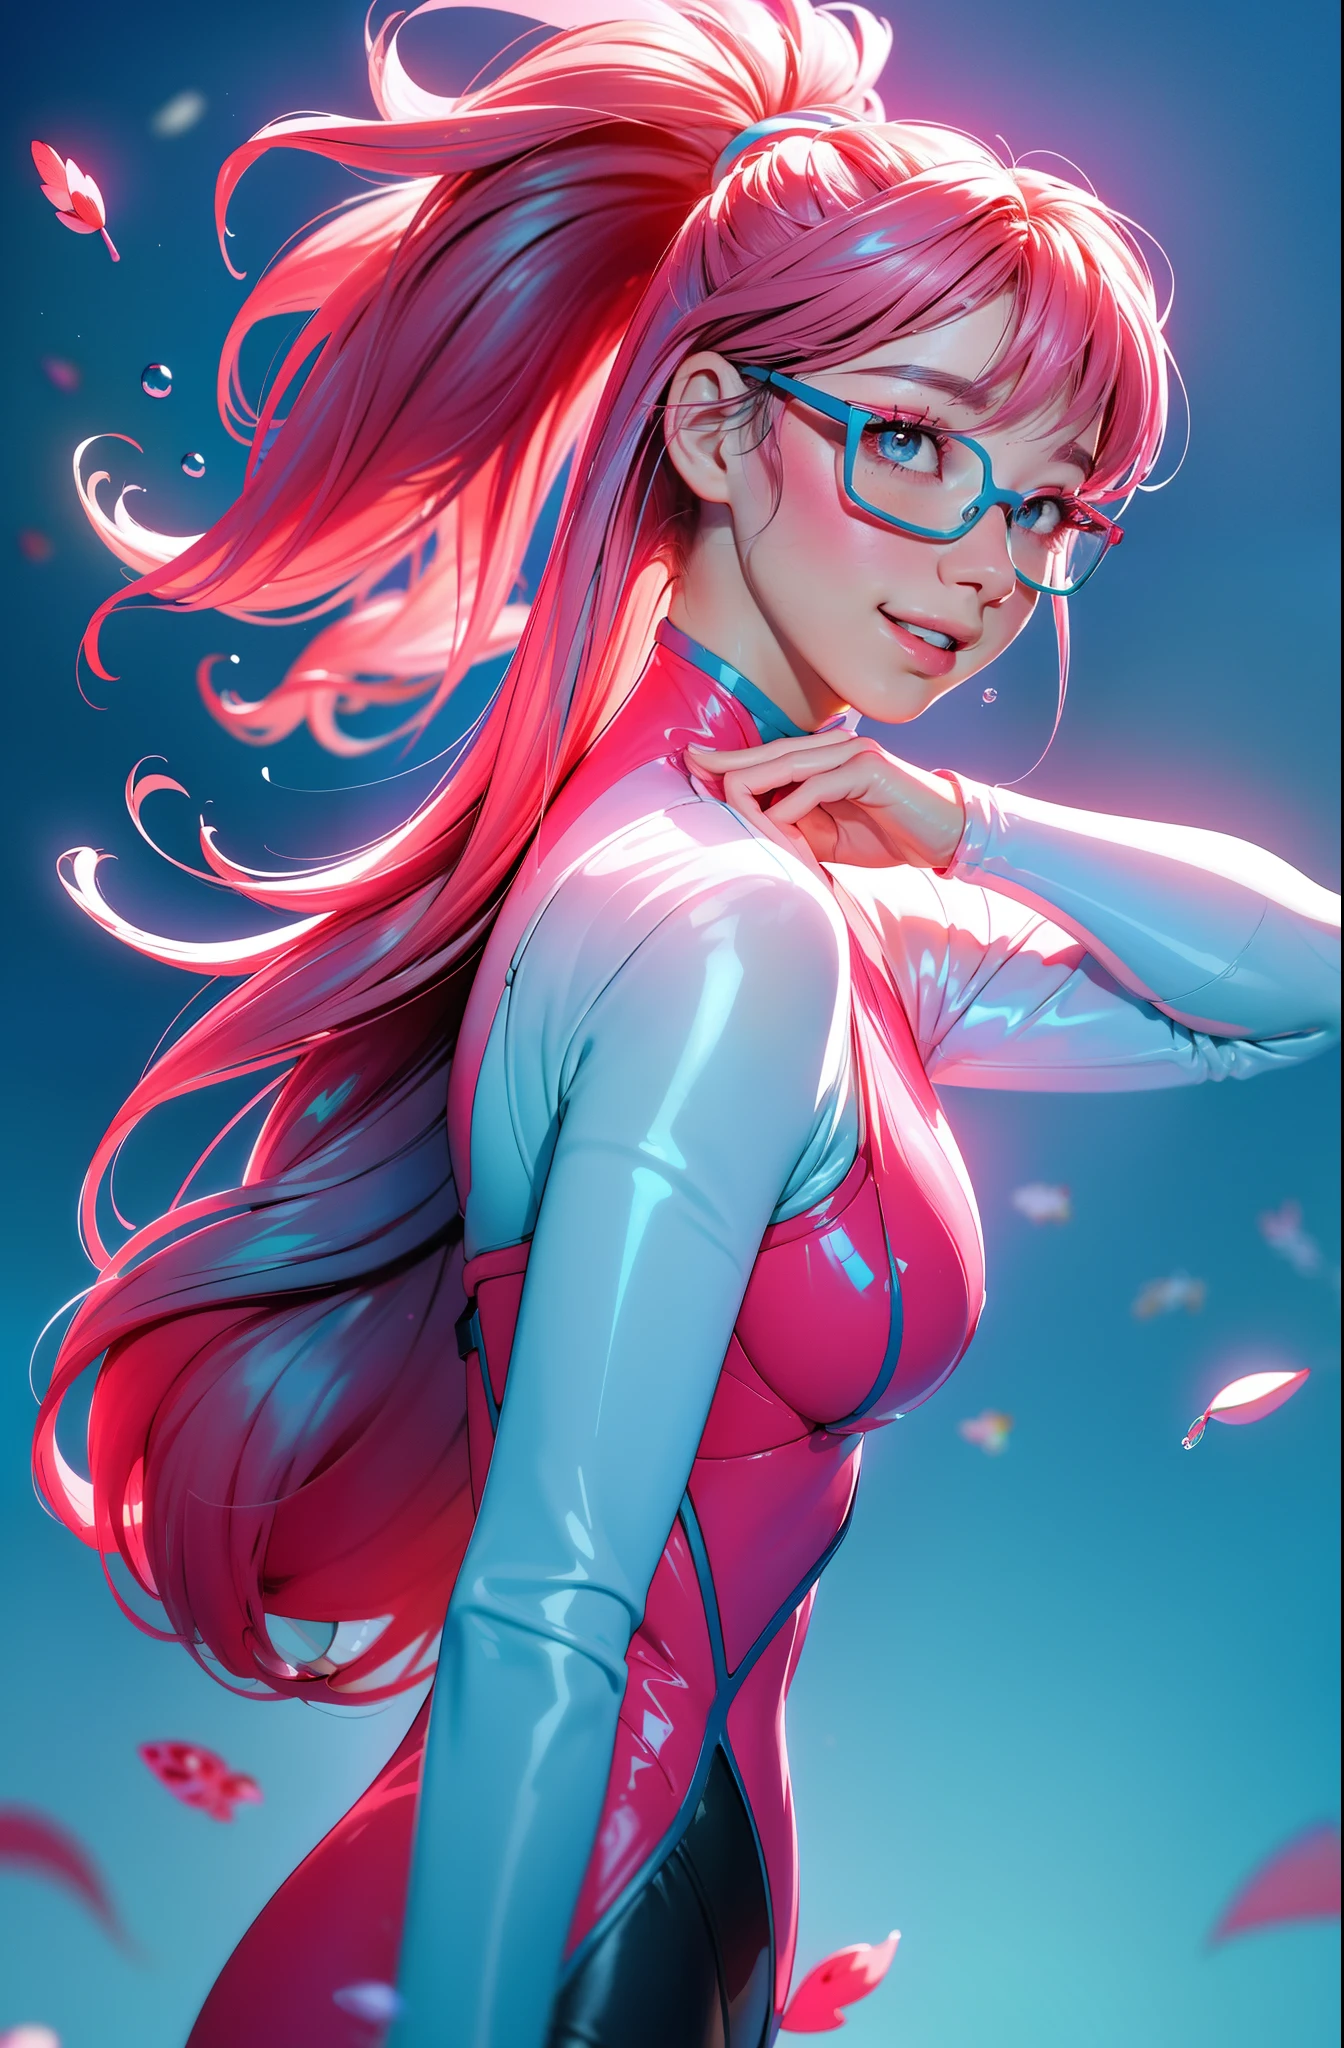 Eyeglasses, Vision Pro googles, cyberpunk female woman (chromatic accents:1.1), sleek pink and White full bodysuit, side view turning to face camera, (Petal Blush, Lagoon Blue color background:1.3), amazing smile, looking at camera, golden hour
